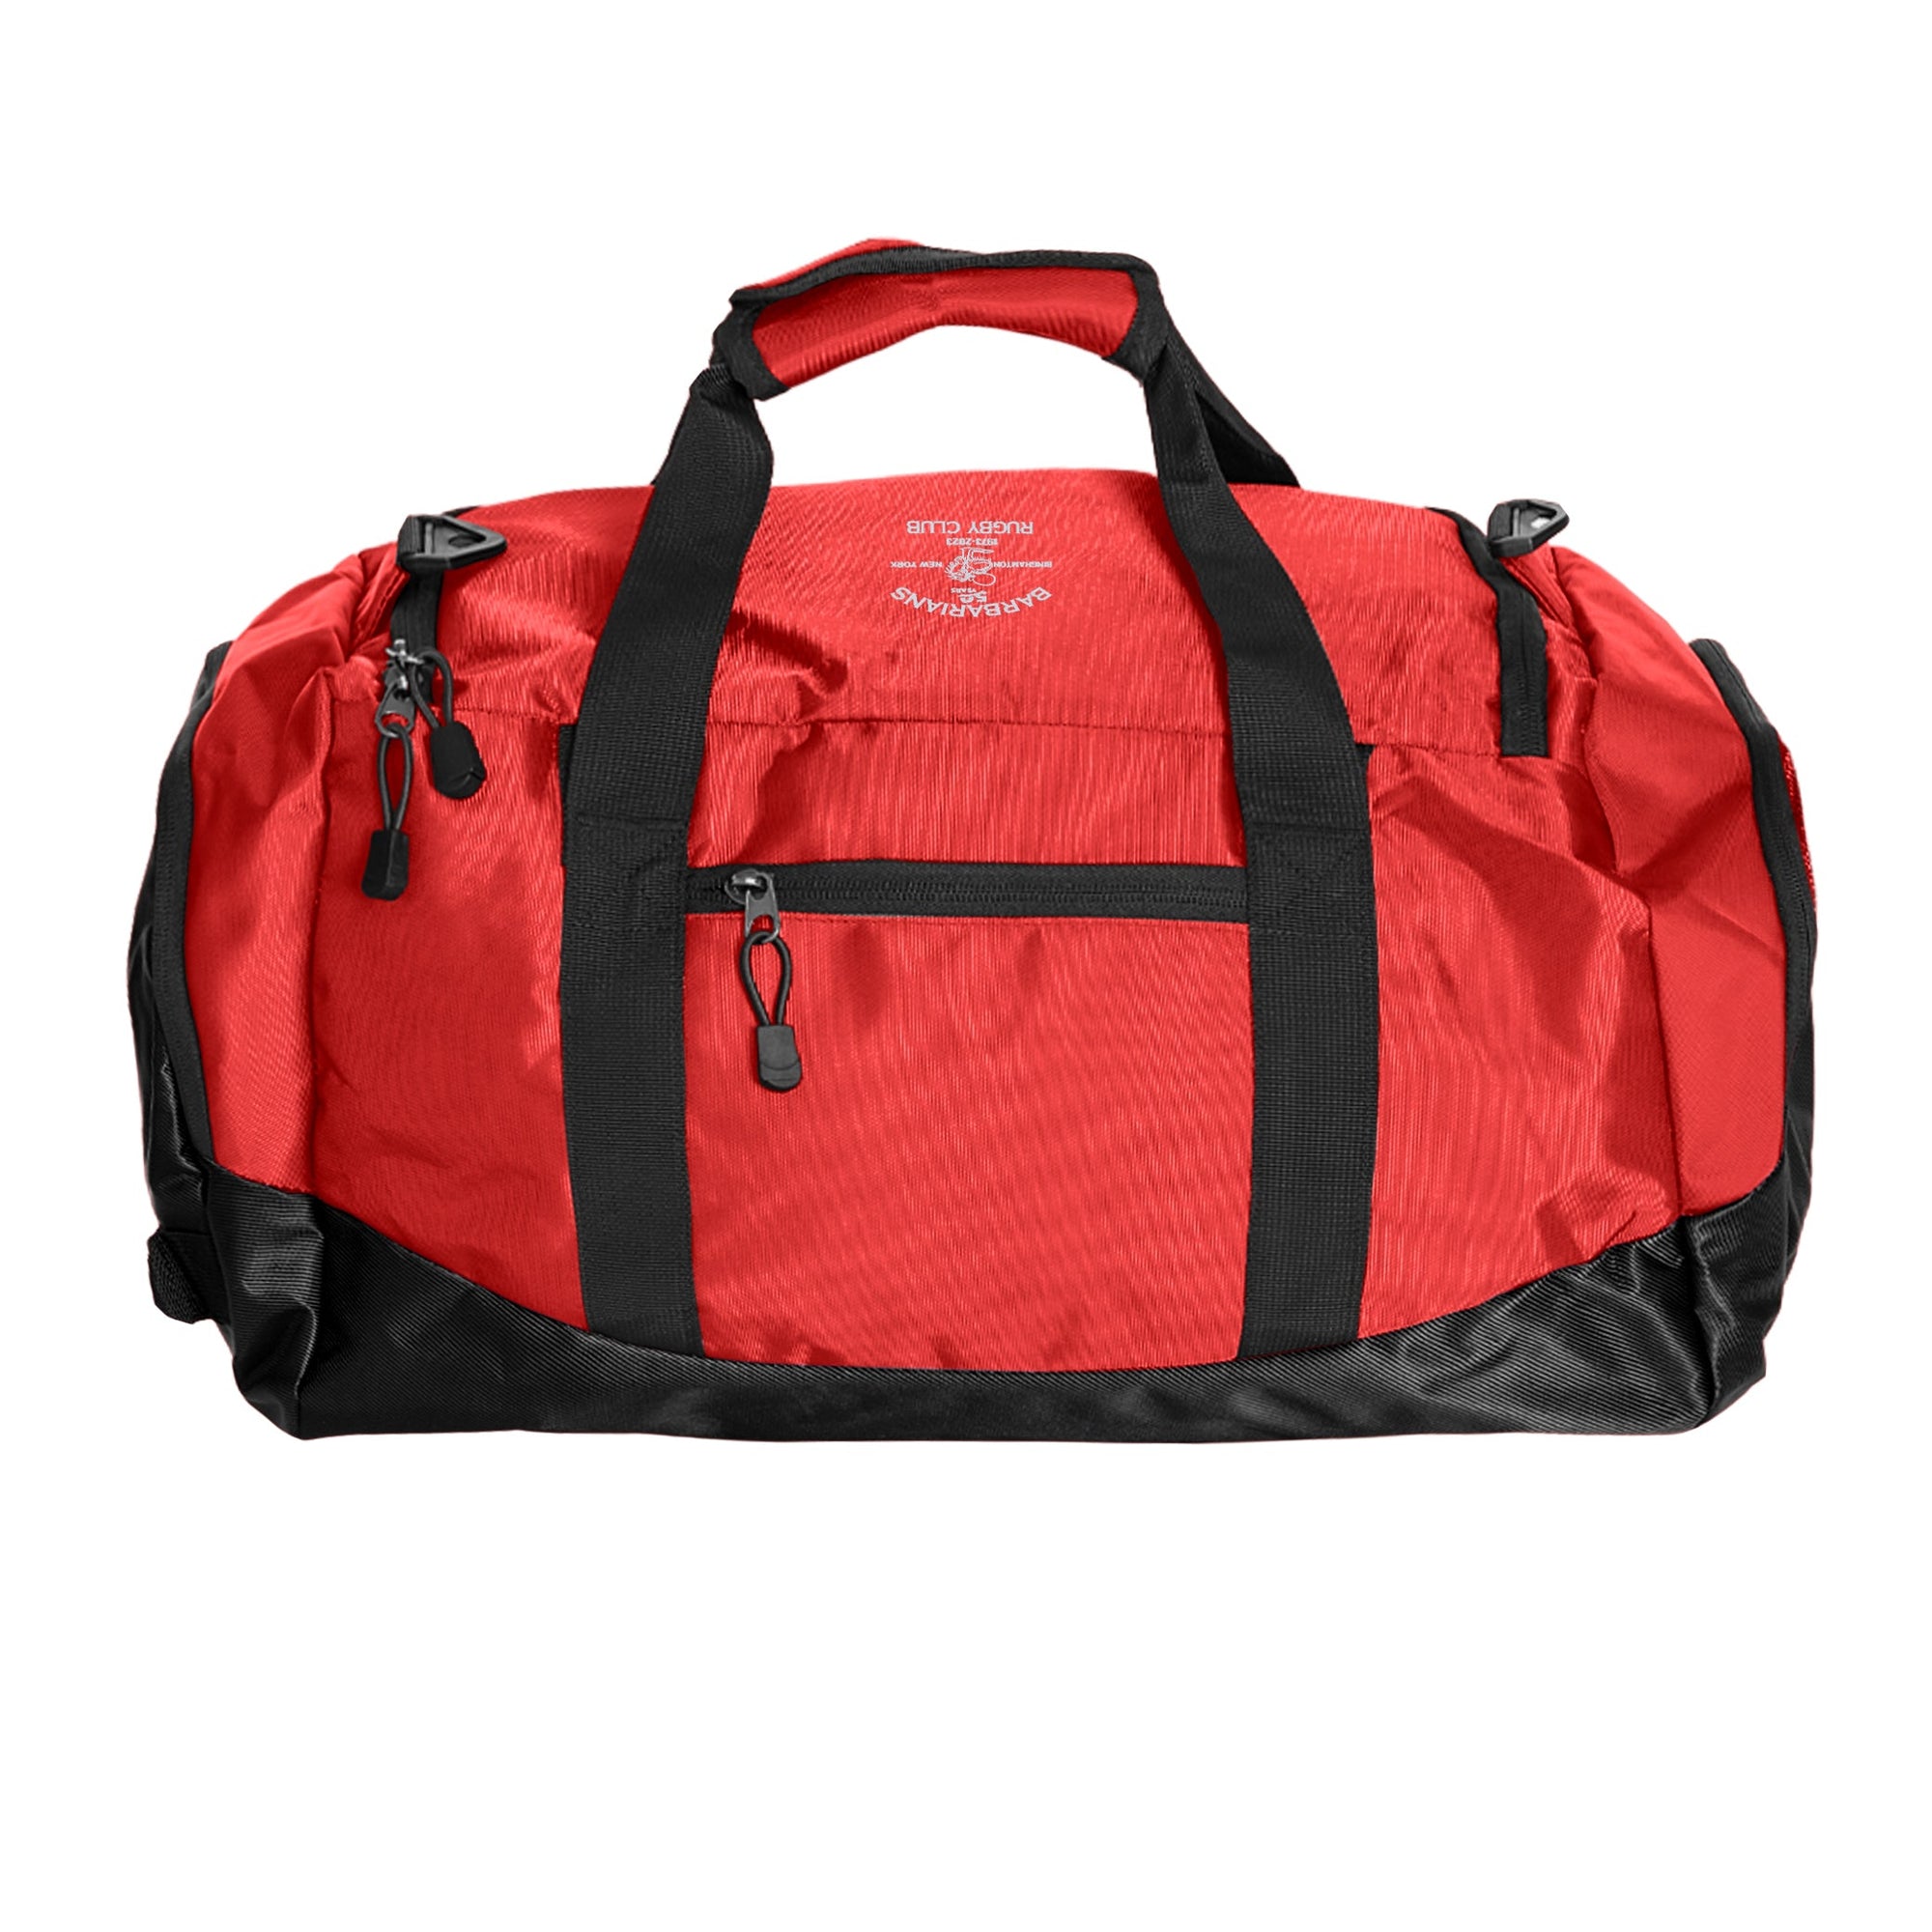 Rugby Imports Binghamton Barbarians Player Holdall V3